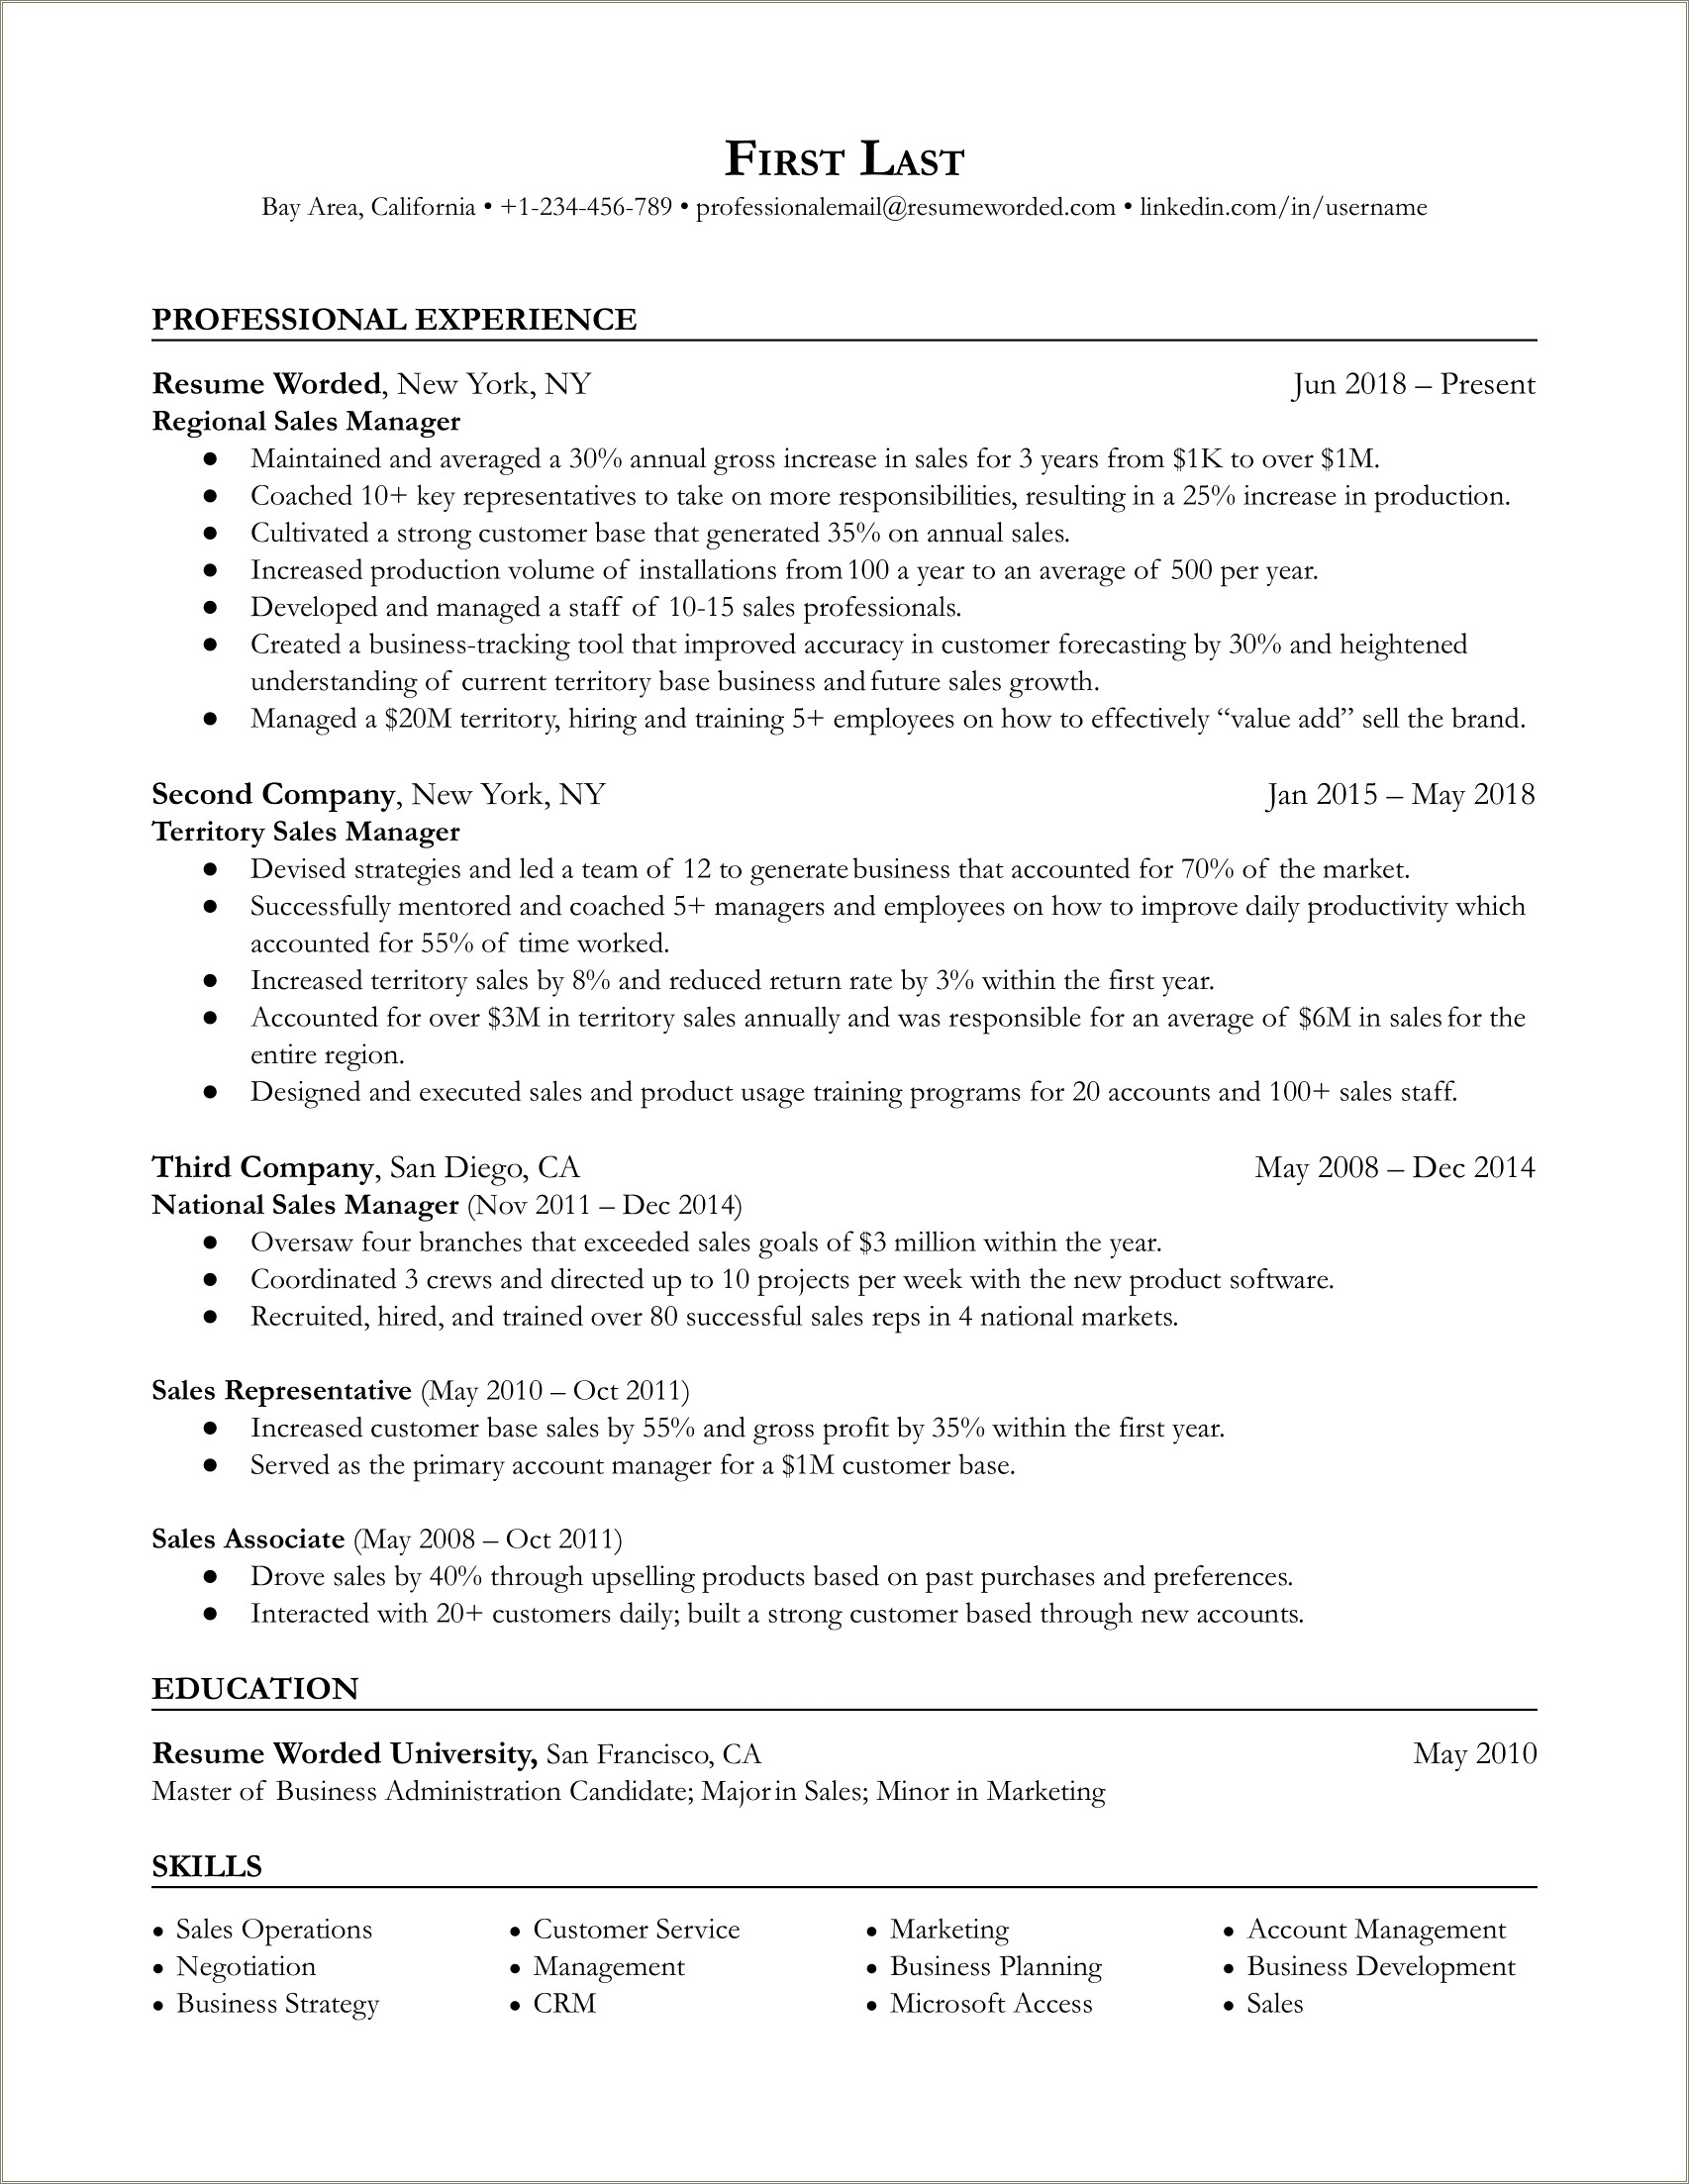 Resume For A Finance Manager In Car Sales